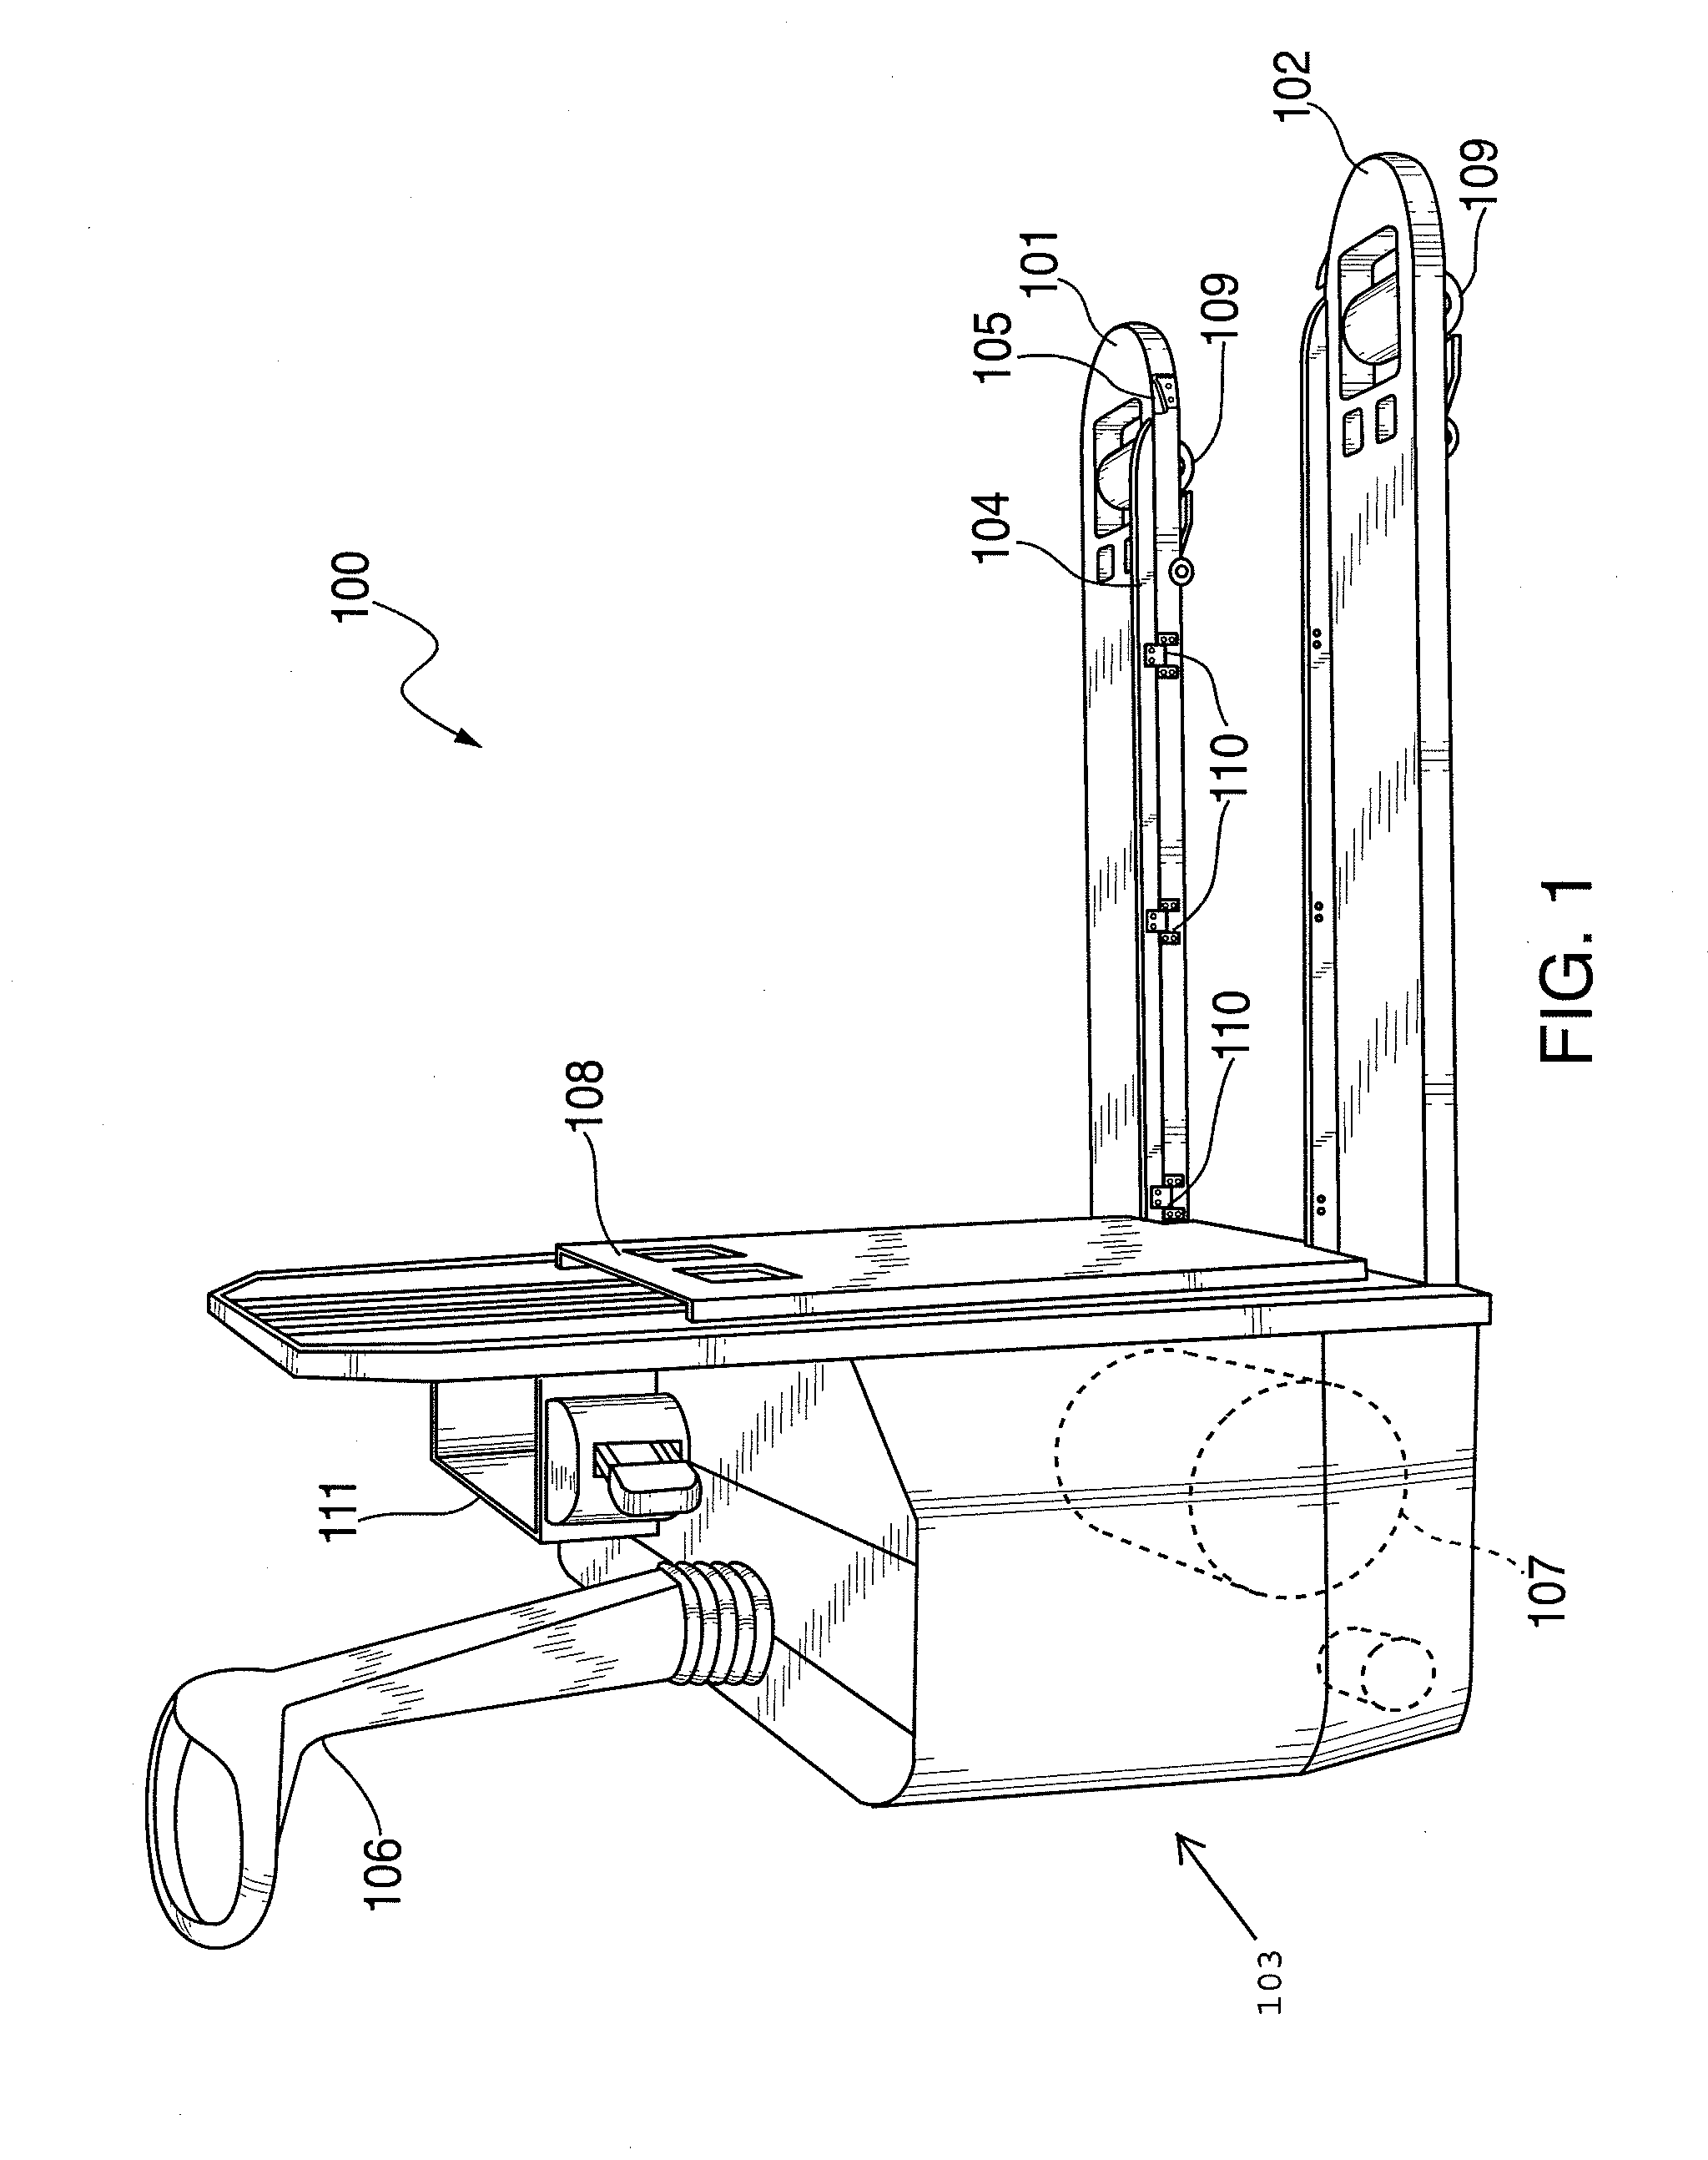 Pallet transportation assembly and processes of transporting pallets using the same